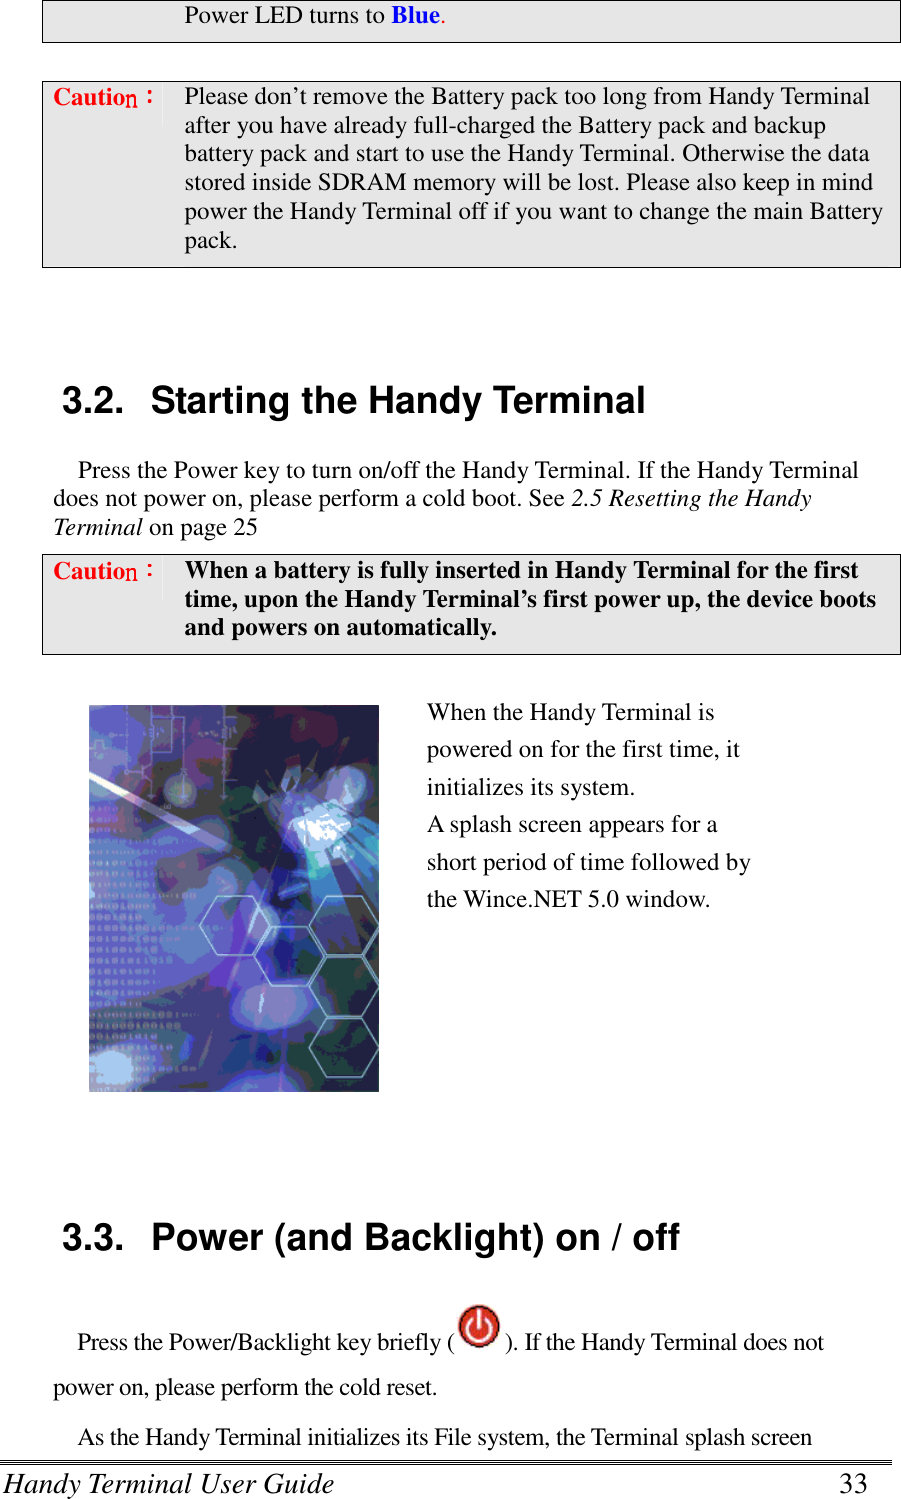 Handy Terminal User Guide      33 Power LED turns to Blue.  Cautionnnn：：：： Please don’t remove the Battery pack too long from Handy Terminal after you have already full-charged the Battery pack and backup battery pack and start to use the Handy Terminal. Otherwise the data stored inside SDRAM memory will be lost. Please also keep in mind power the Handy Terminal off if you want to change the main Battery pack.   3.2.  Starting the Handy Terminal Press the Power key to turn on/off the Handy Terminal. If the Handy Terminal does not power on, please perform a cold boot. See 2.5 Resetting the Handy Terminal on page 25 Cautionnnn：：：： When a battery is fully inserted in Handy Terminal for the first time, upon the Handy Terminal’s first power up, the device boots and powers on automatically.   When the Handy Terminal is powered on for the first time, it initializes its system.   A splash screen appears for a short period of time followed by the Wince.NET 5.0 window.   3.3.  Power (and Backlight) on / off Press the Power/Backlight key briefly ( ). If the Handy Terminal does not power on, please perform the cold reset.   As the Handy Terminal initializes its File system, the Terminal splash screen 